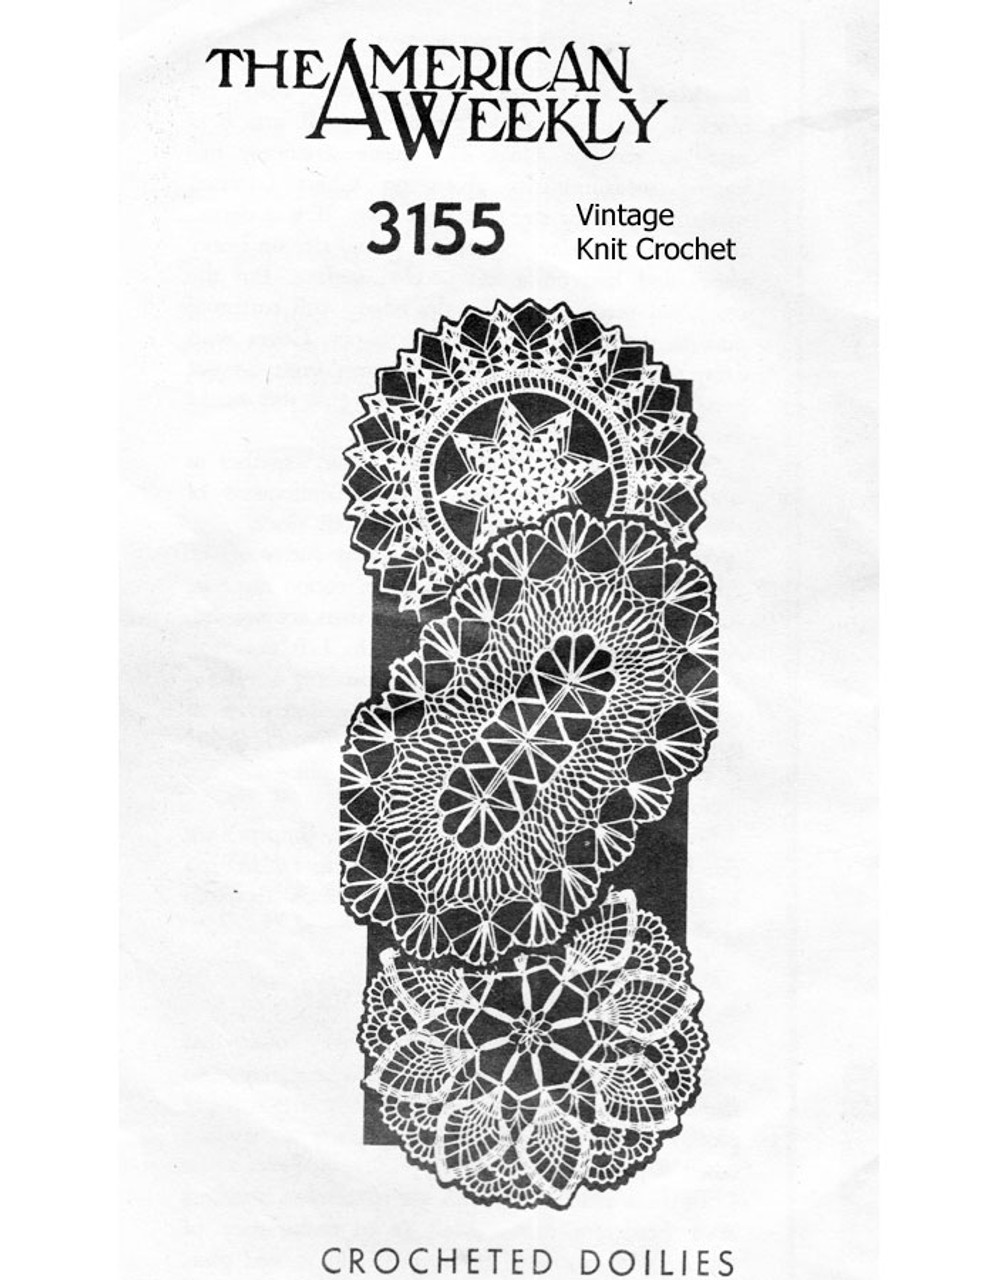 Small crochet doilies pattern, The American Weekly 3155